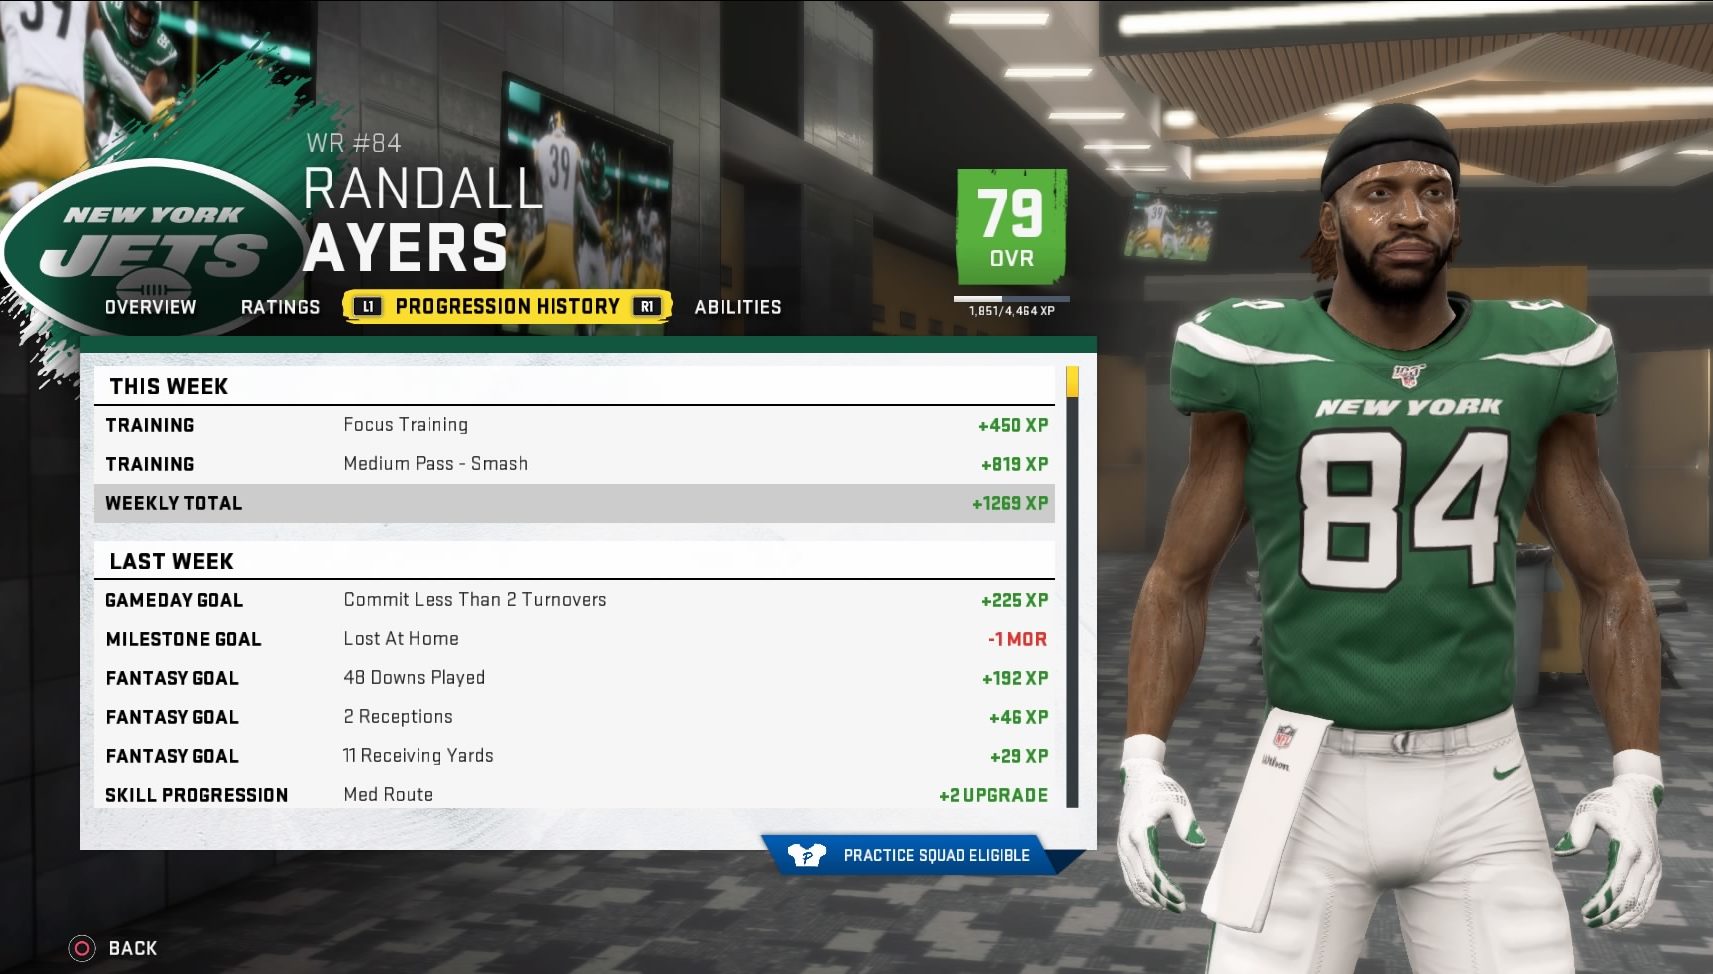 Madden progression system is wrong